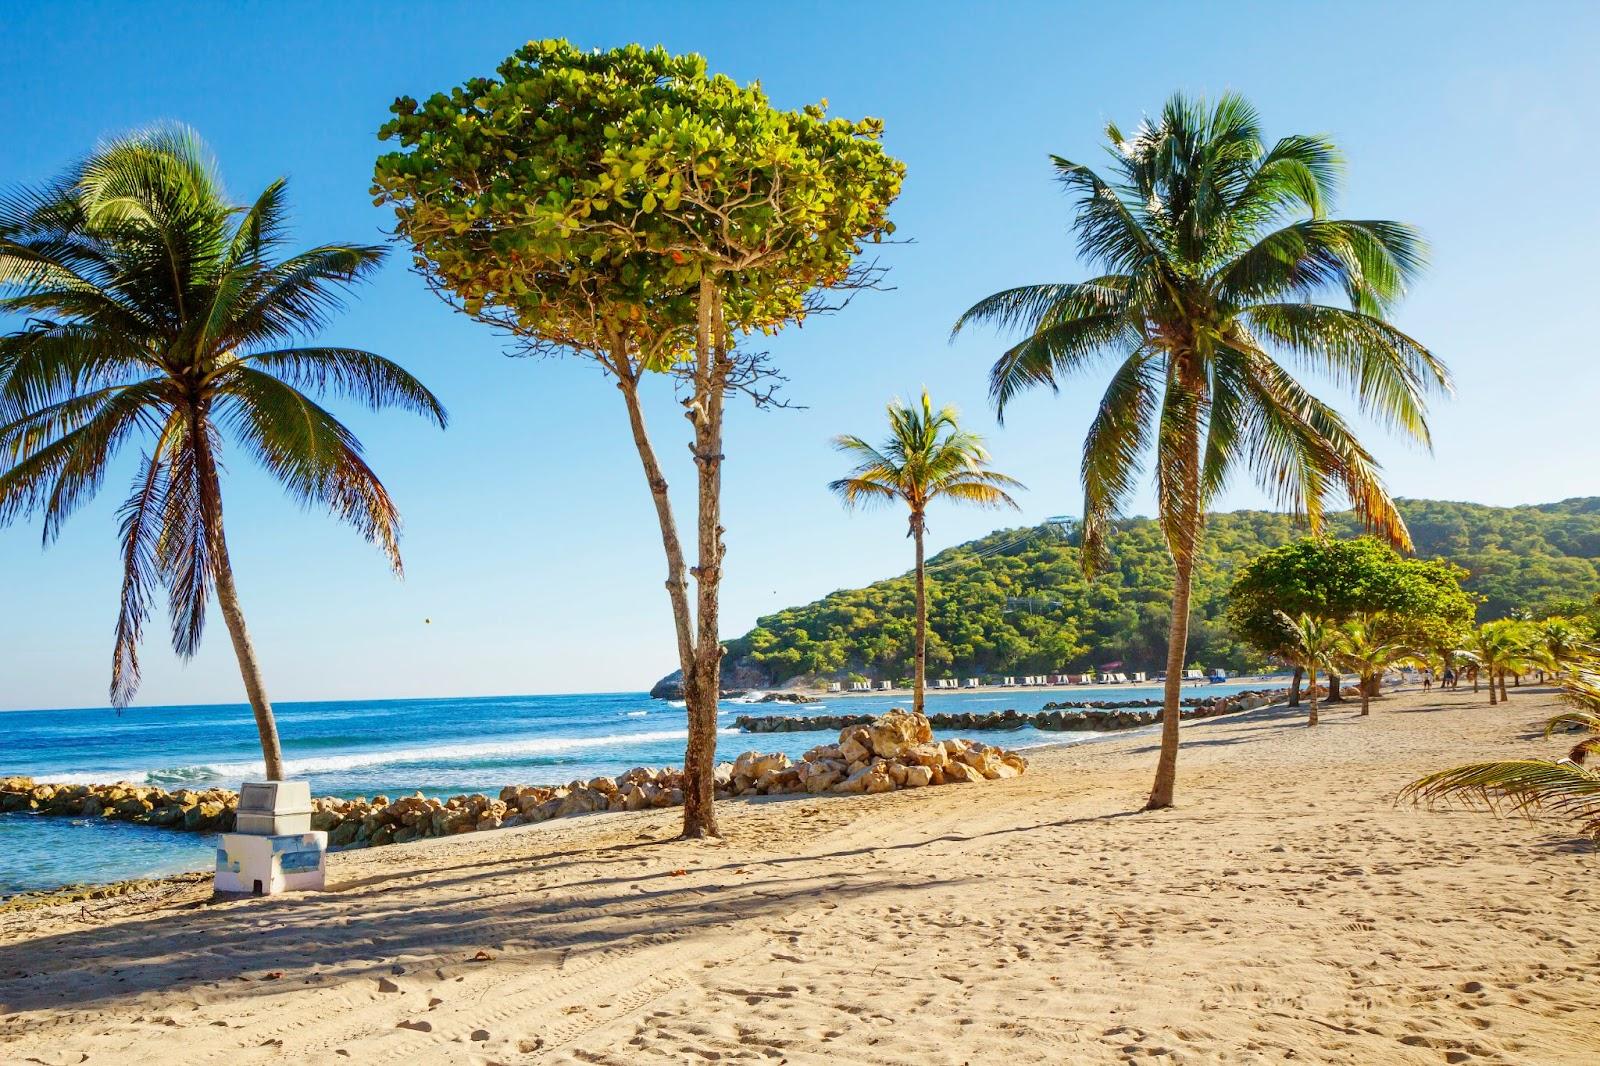 Haitian beach with yellow sand and palm trees